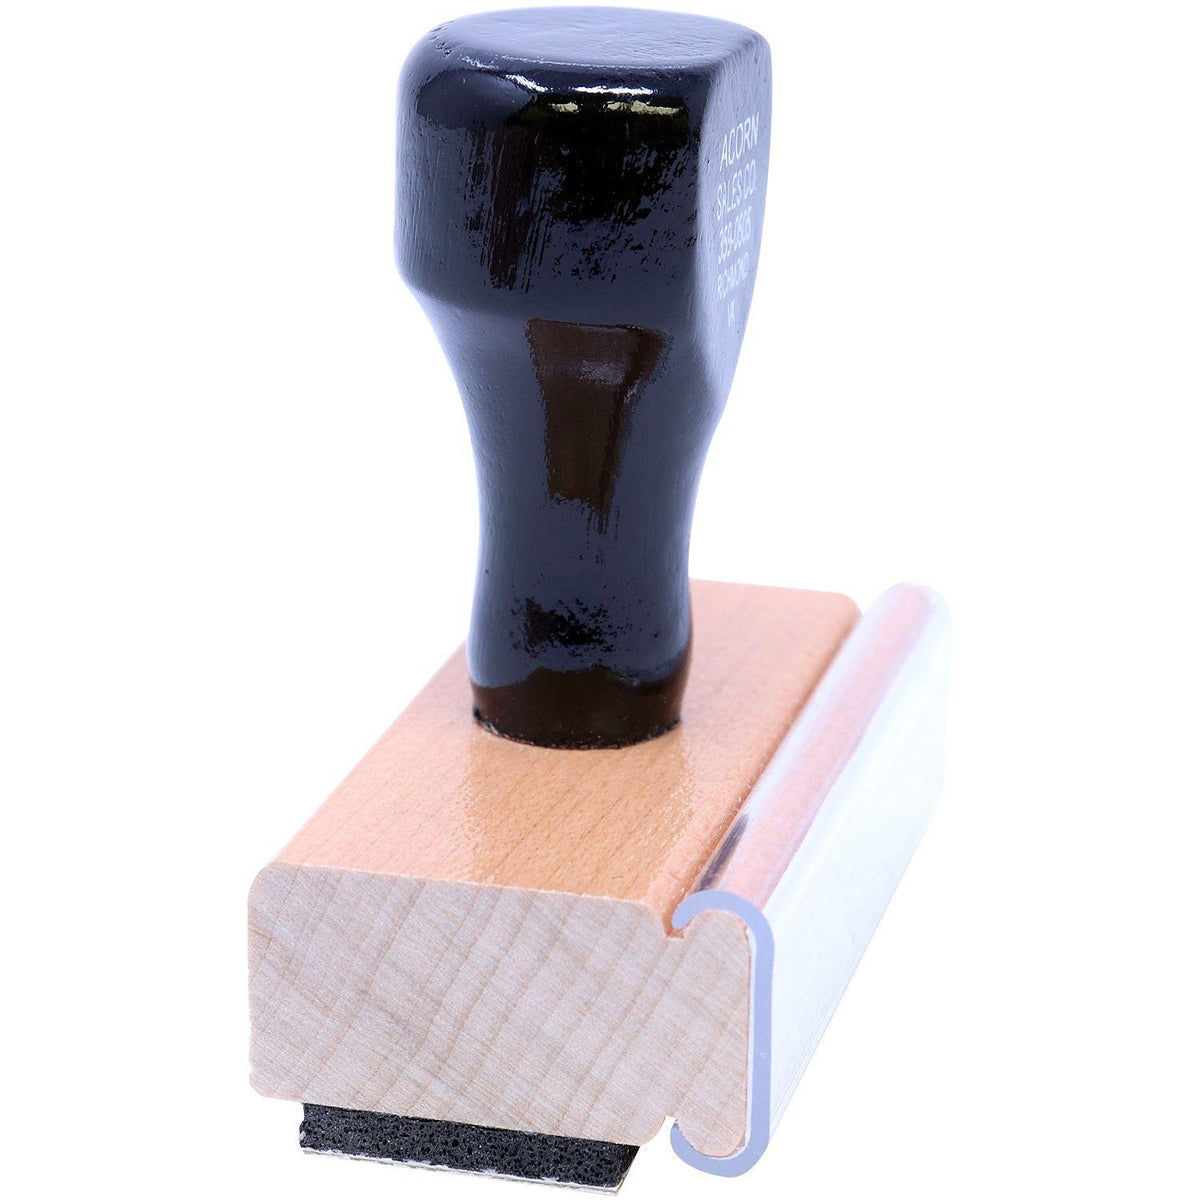 Side View of Large Physical Due Rubber Stamp at an Angle